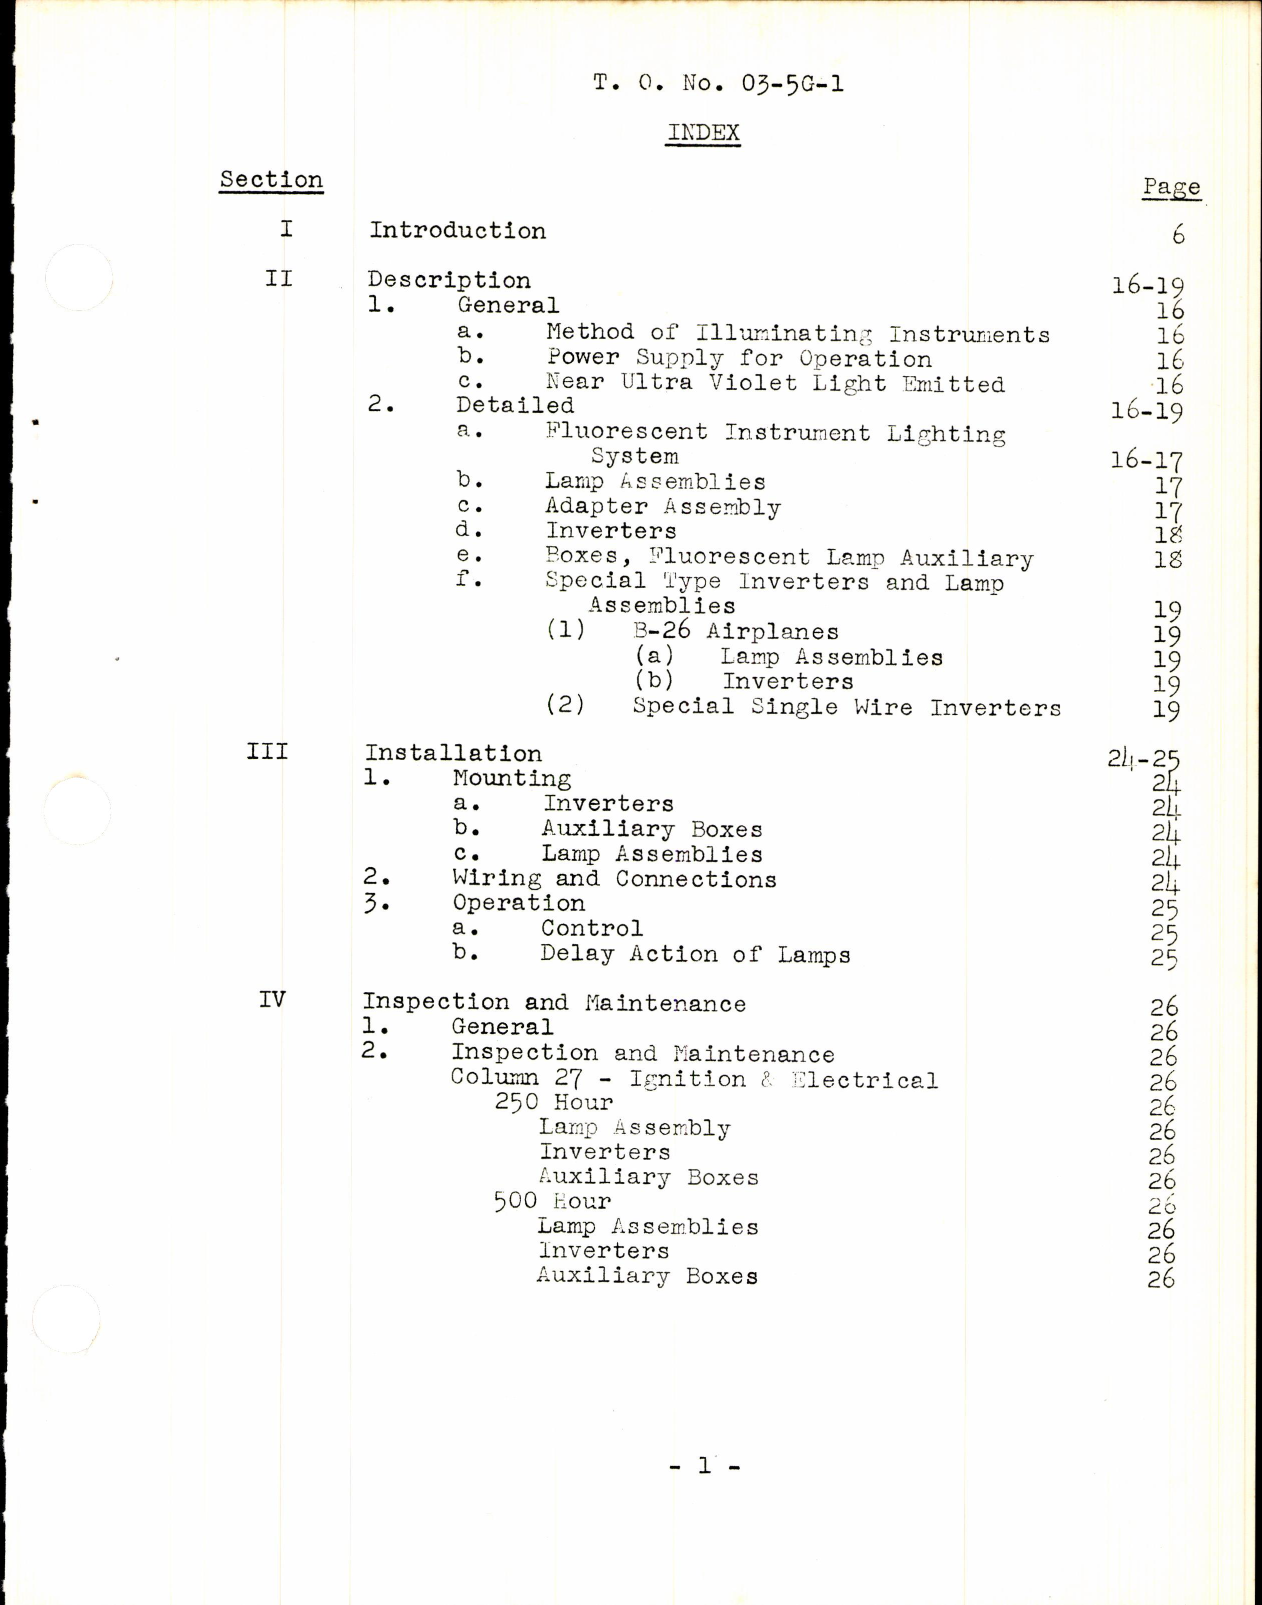 Sample page 3 from AirCorps Library document: Inverters, Auxiliary Boxes & Lamp Assemblies